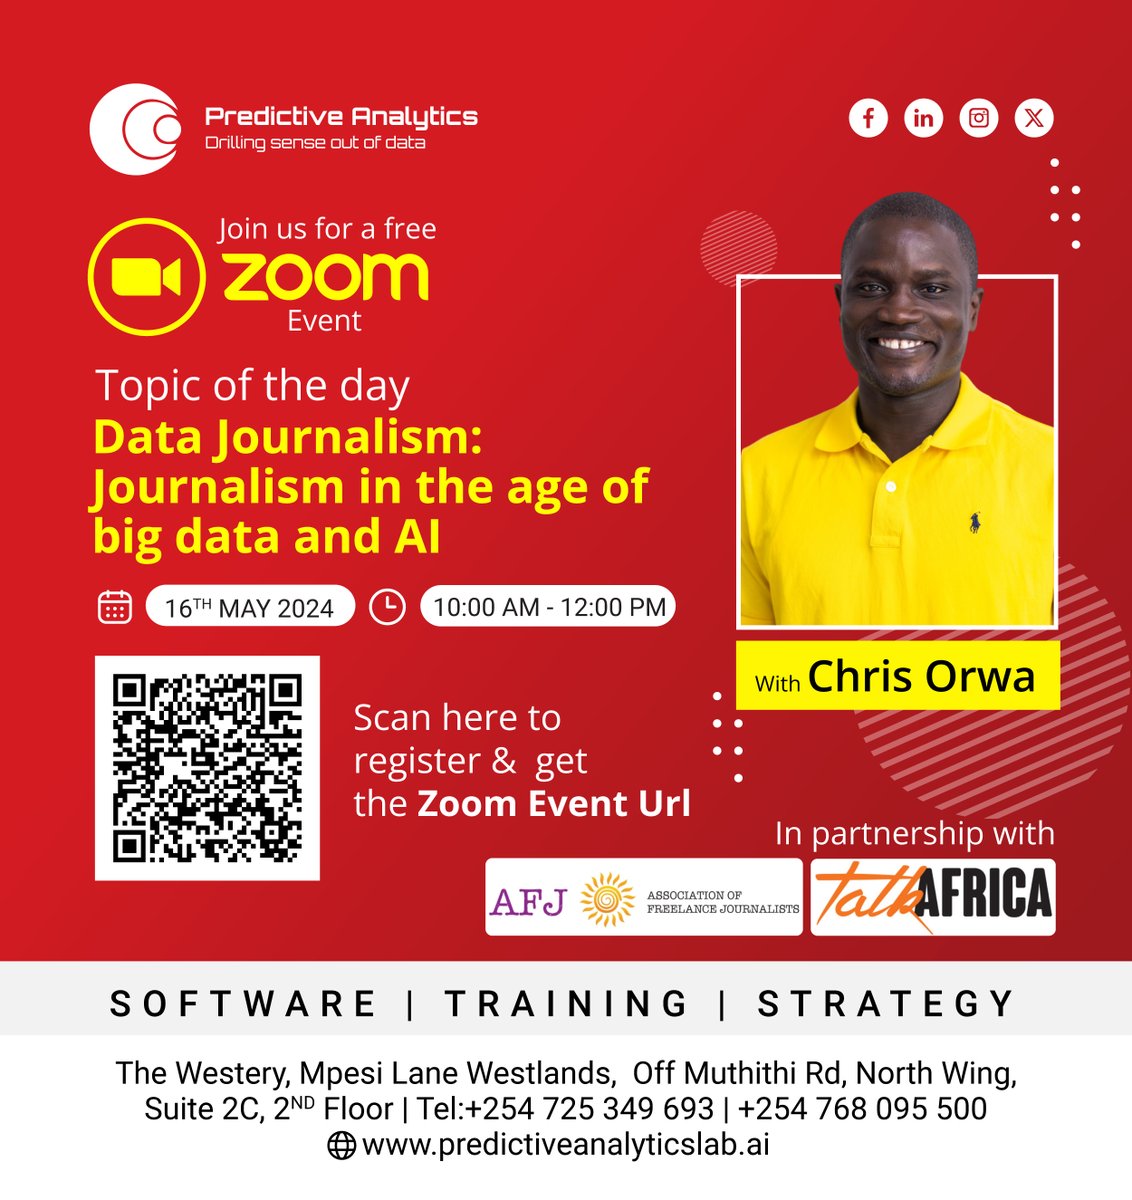 ⏰Tomorrow's the big day for our event on 'Data Journalism: Journalism in the Age of Big Data and AI' featuring Chris Orwa. Register now and join us for an eye-opening discussion.
predictiveanalyticslab.ai/event/data-jou…
Zoom link will be shared on registration📈✍️

#DataJournalism